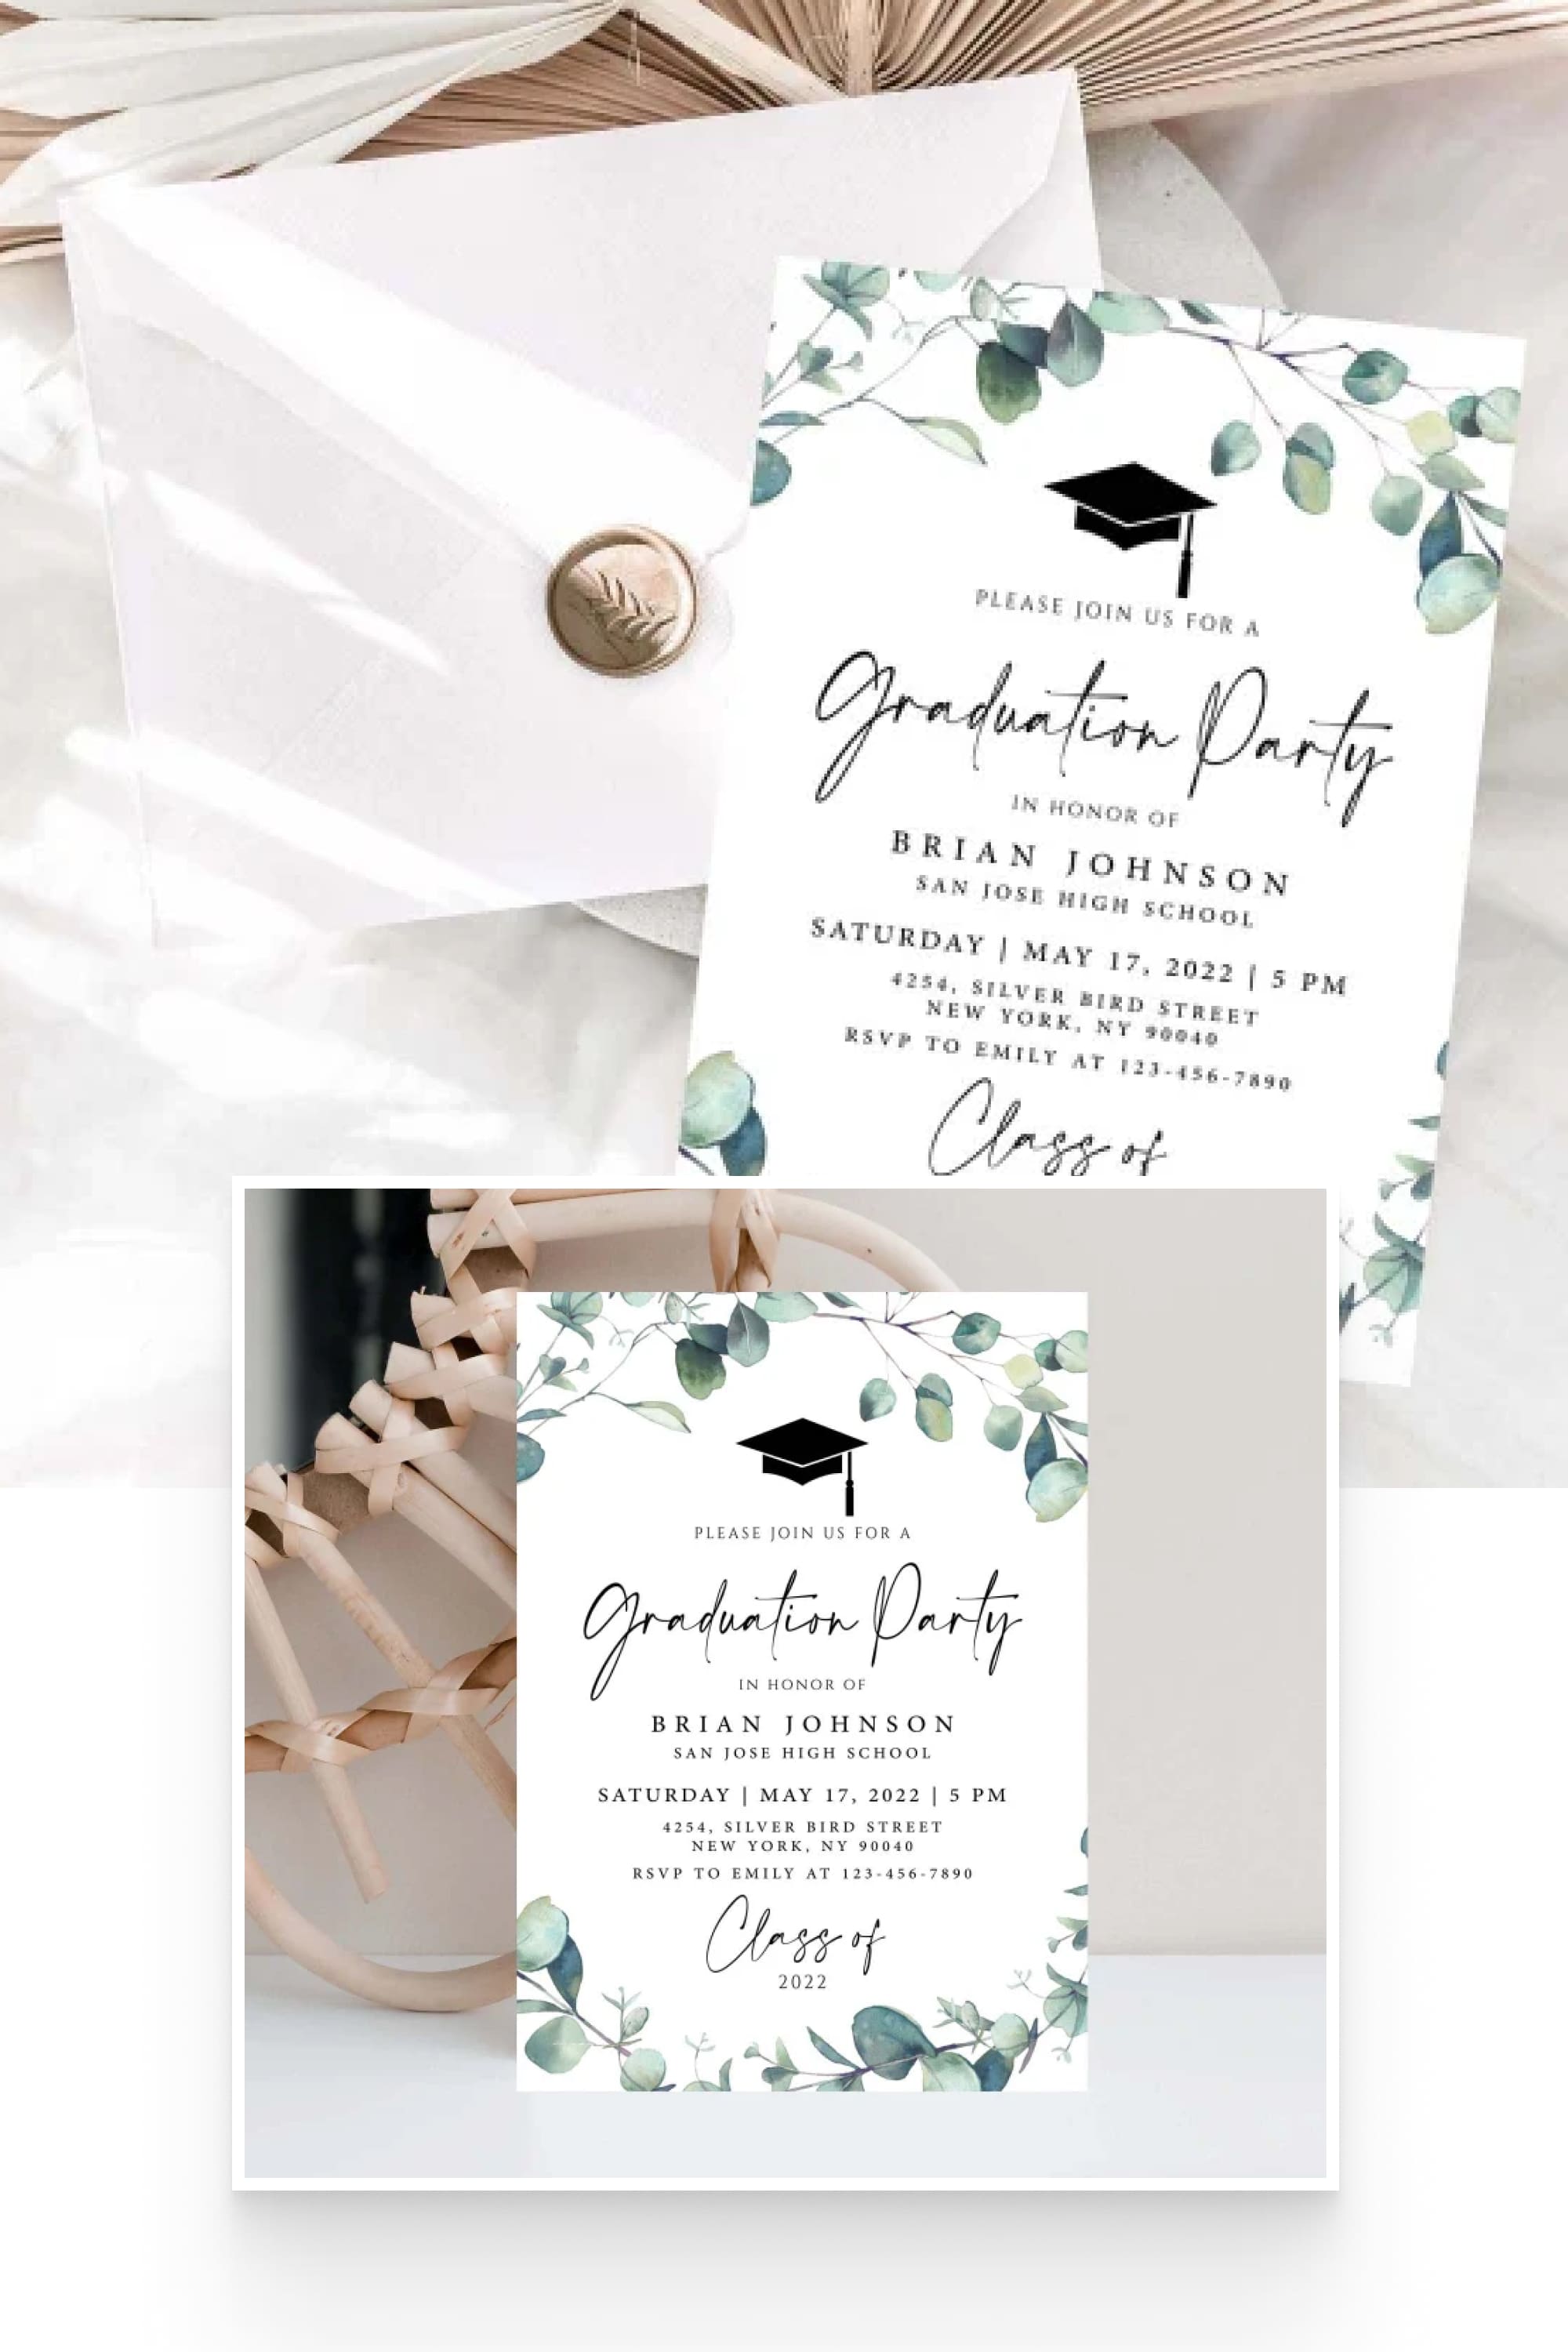 Collage of graduation invitation images with flowers on it.